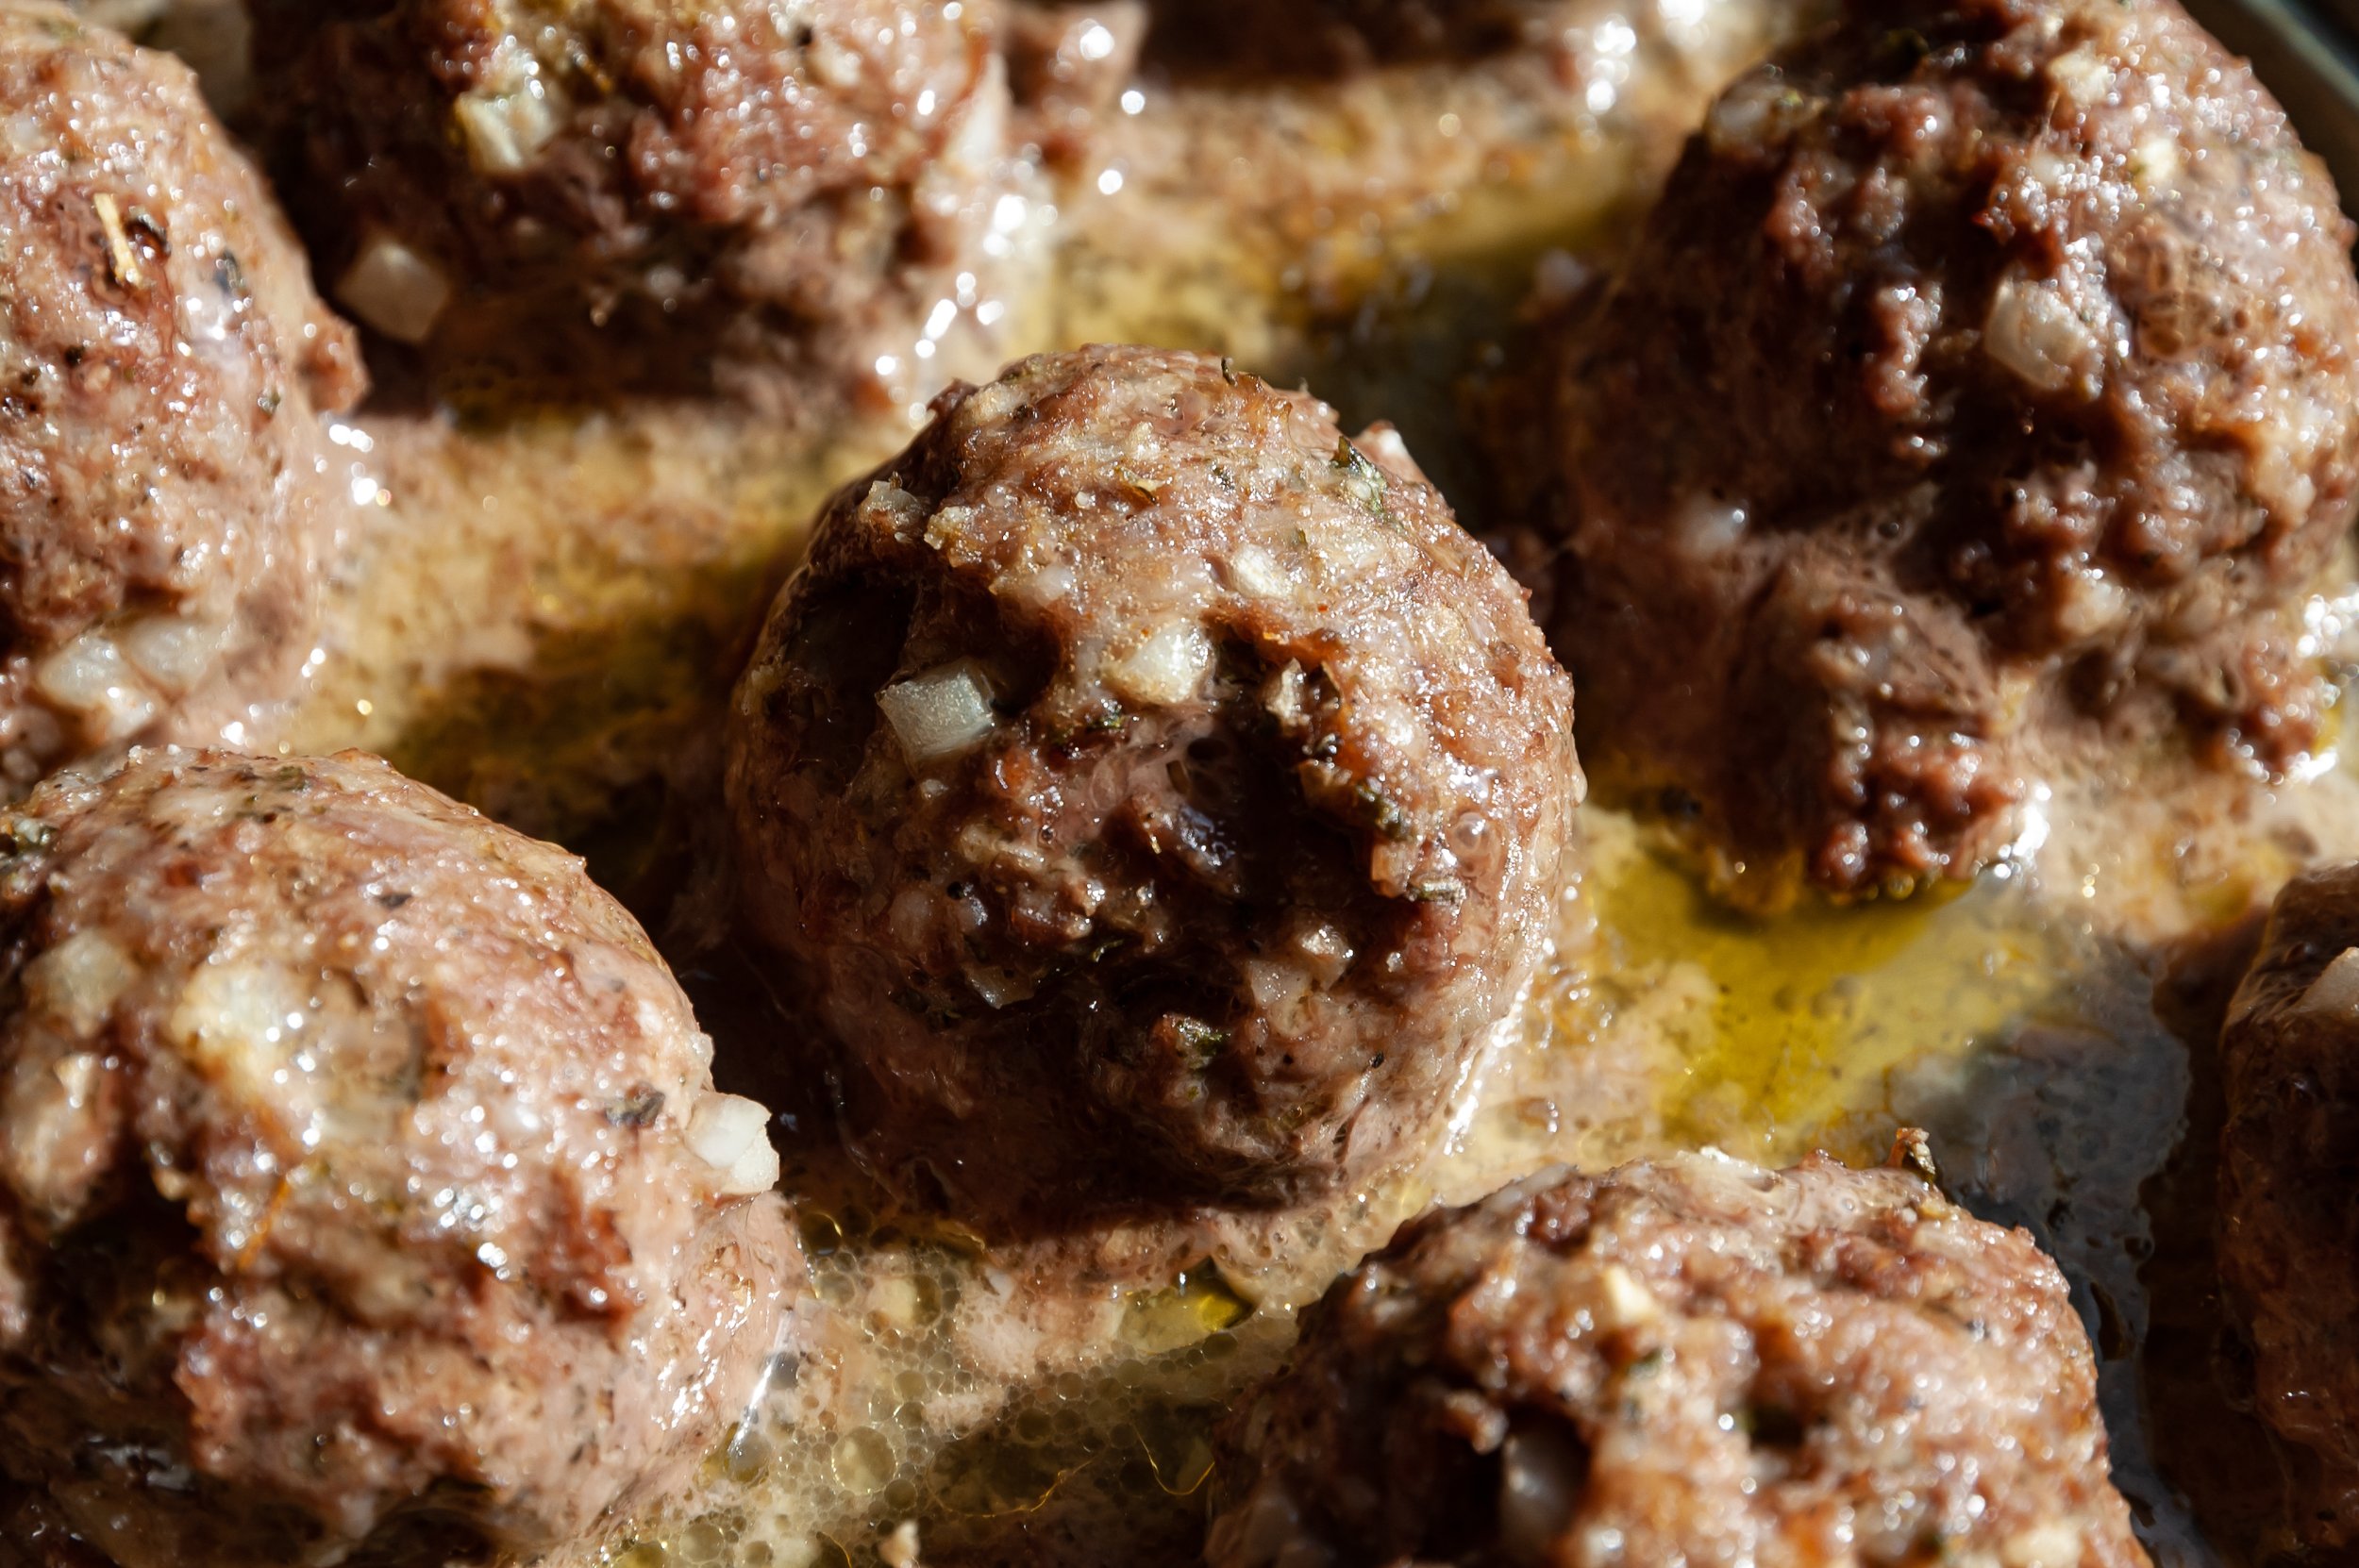 How to Make Gluten-Free Spaghetti and Meatballs